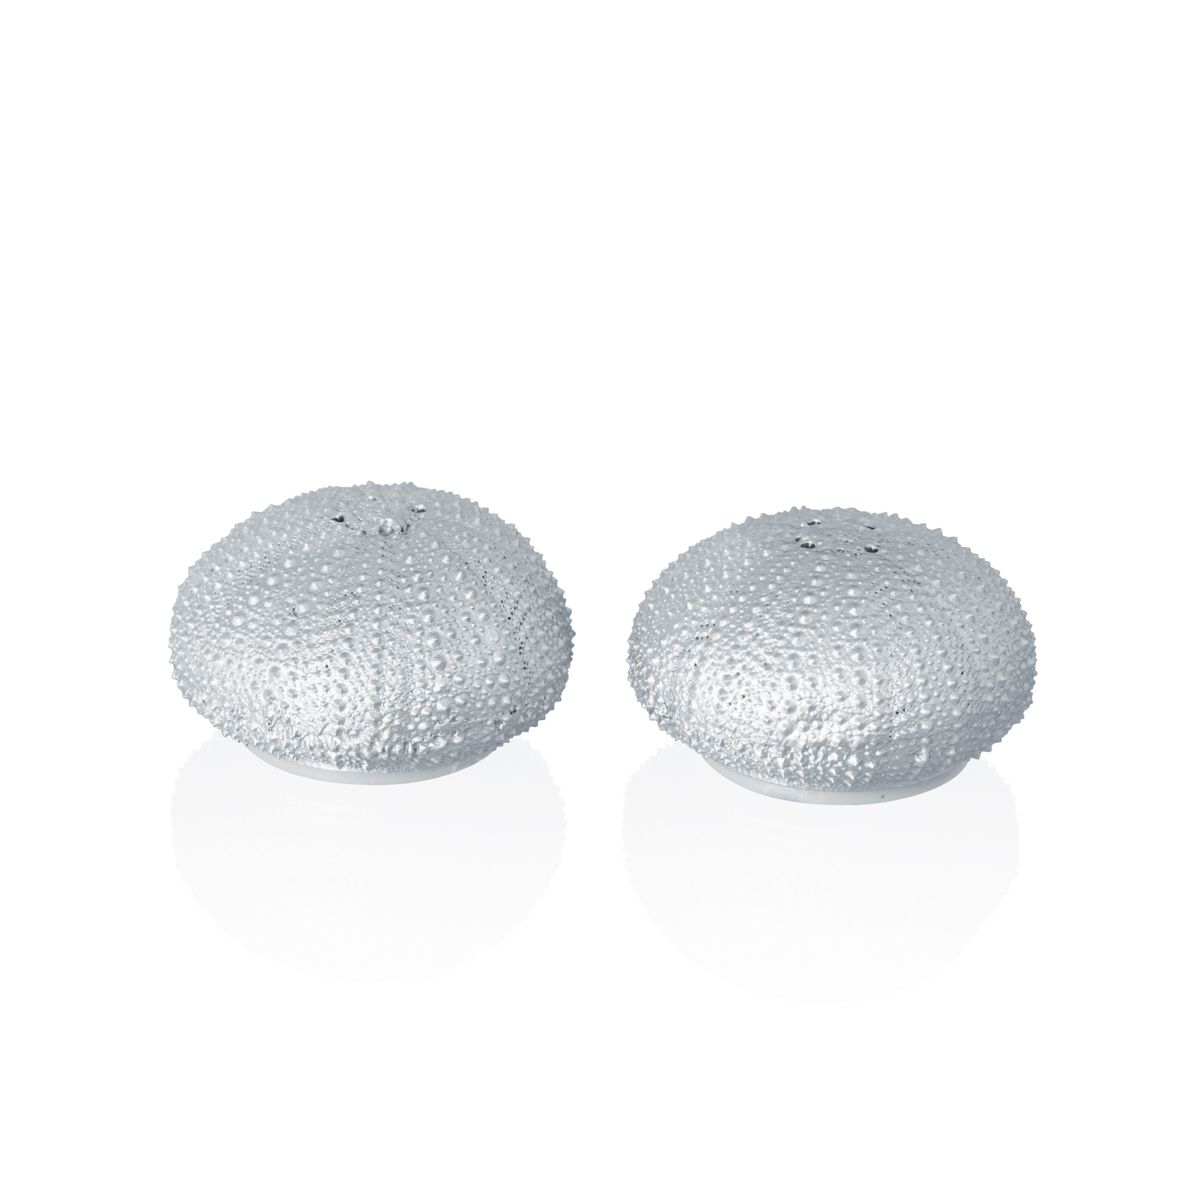 SEA URCHIN SALT & PEPPER SHAKERS | Amos Pewter, Handcrafted in